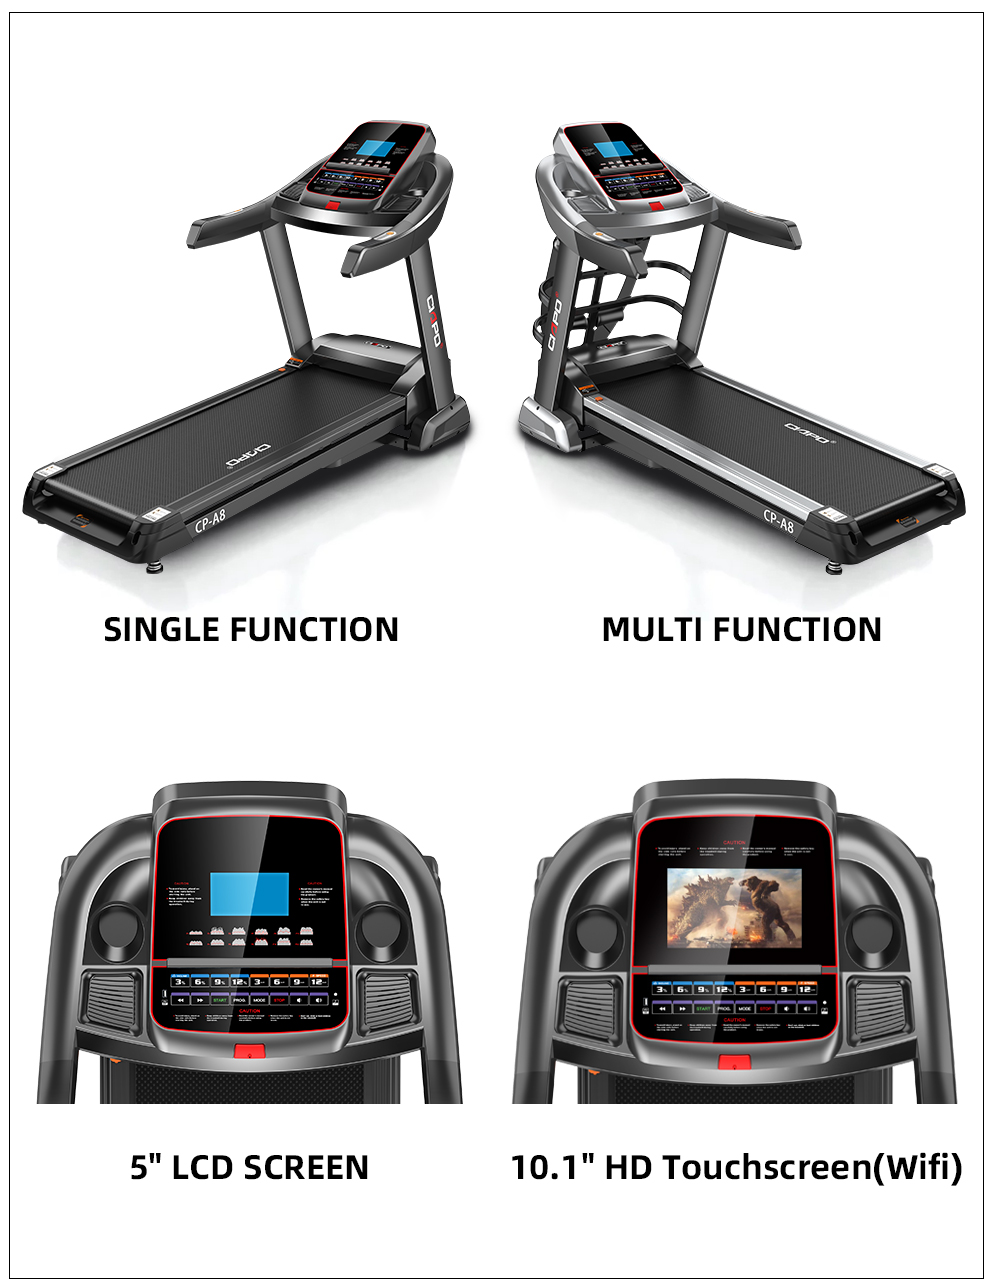 CIAPO CP-A8 Wholesale Electric Treadmill Sports Folding Fitness Treadmill Running Machine for Commercial